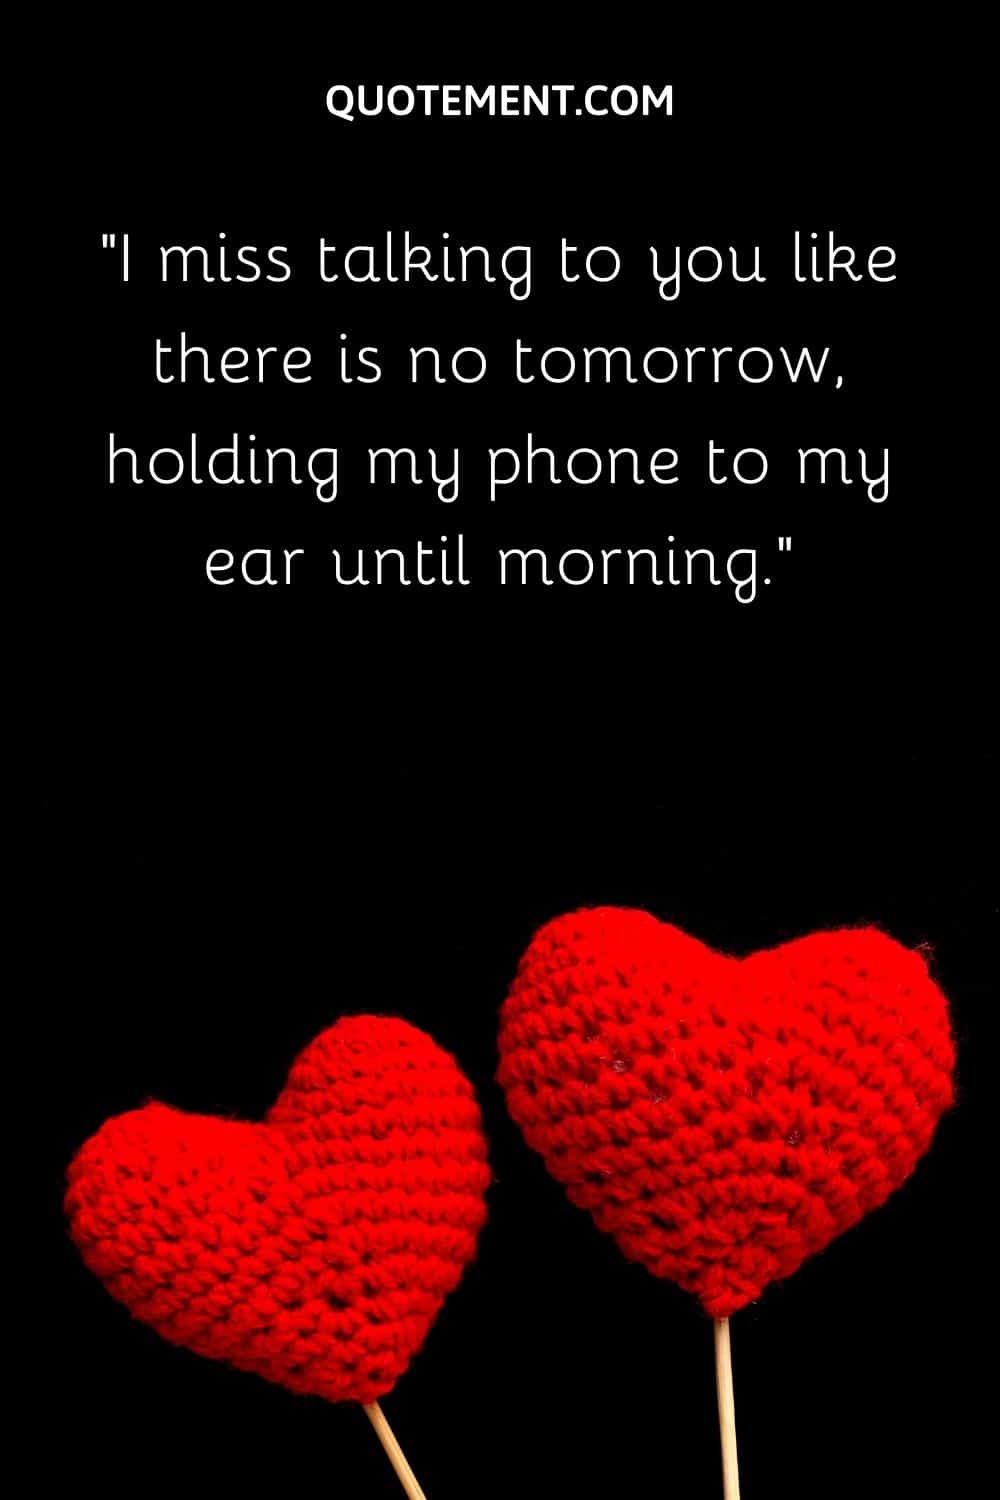 I miss talking to you like there is no tomorrow, holding my phone to my ear until morning.